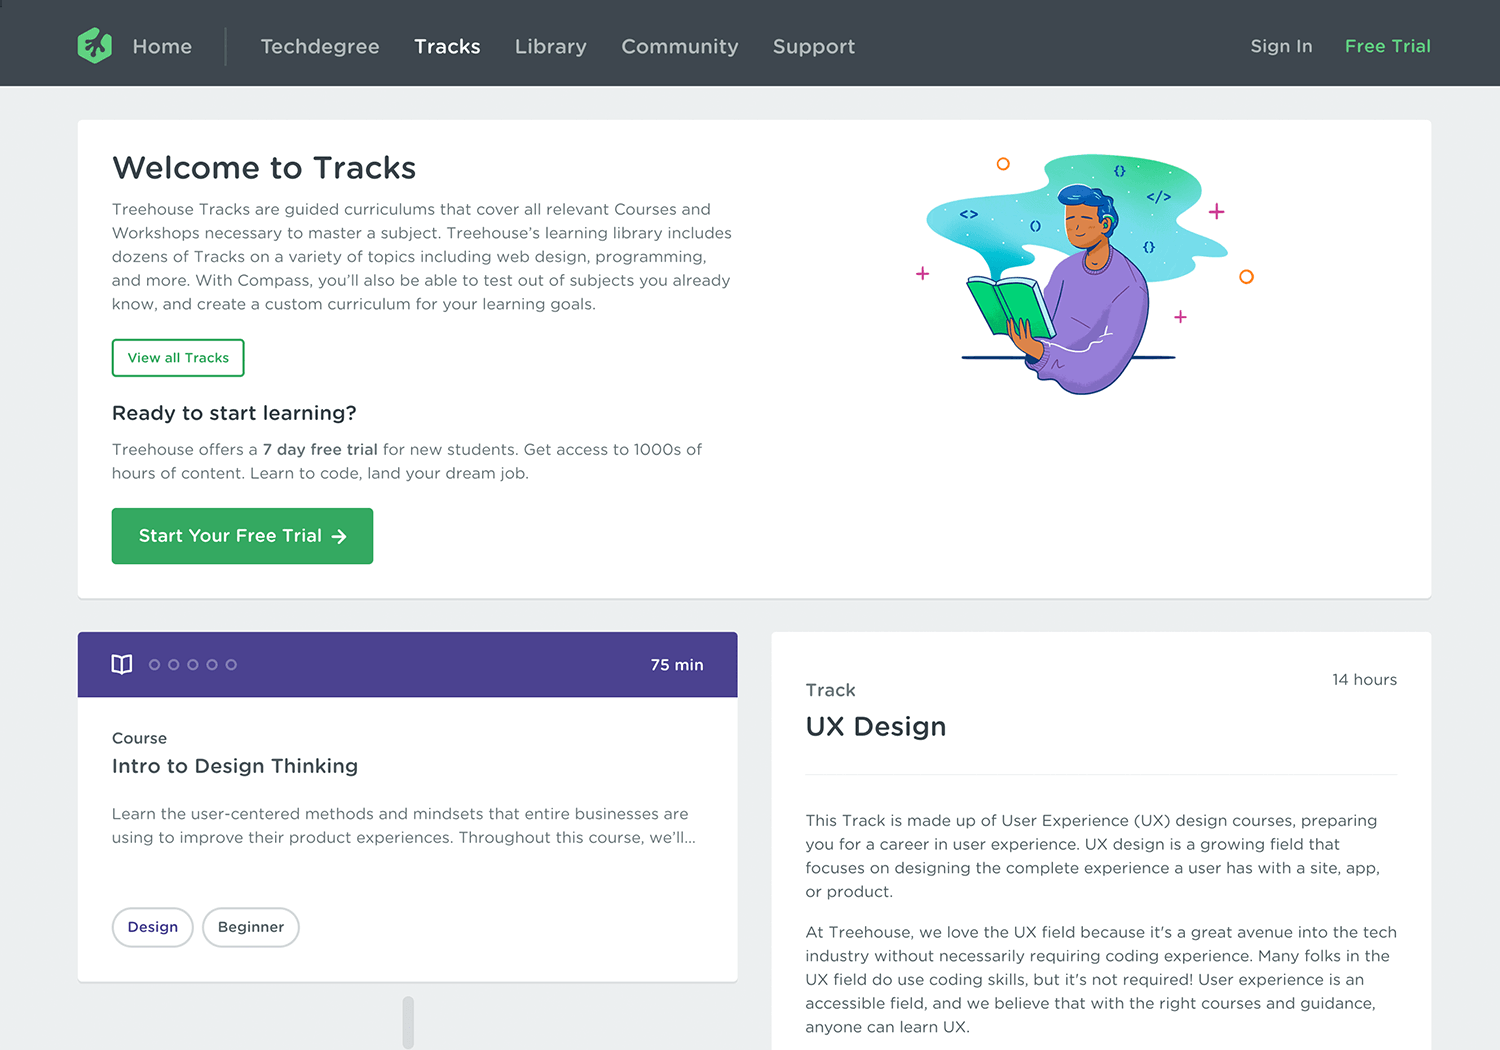 Online UI/UX design course at Treehouse